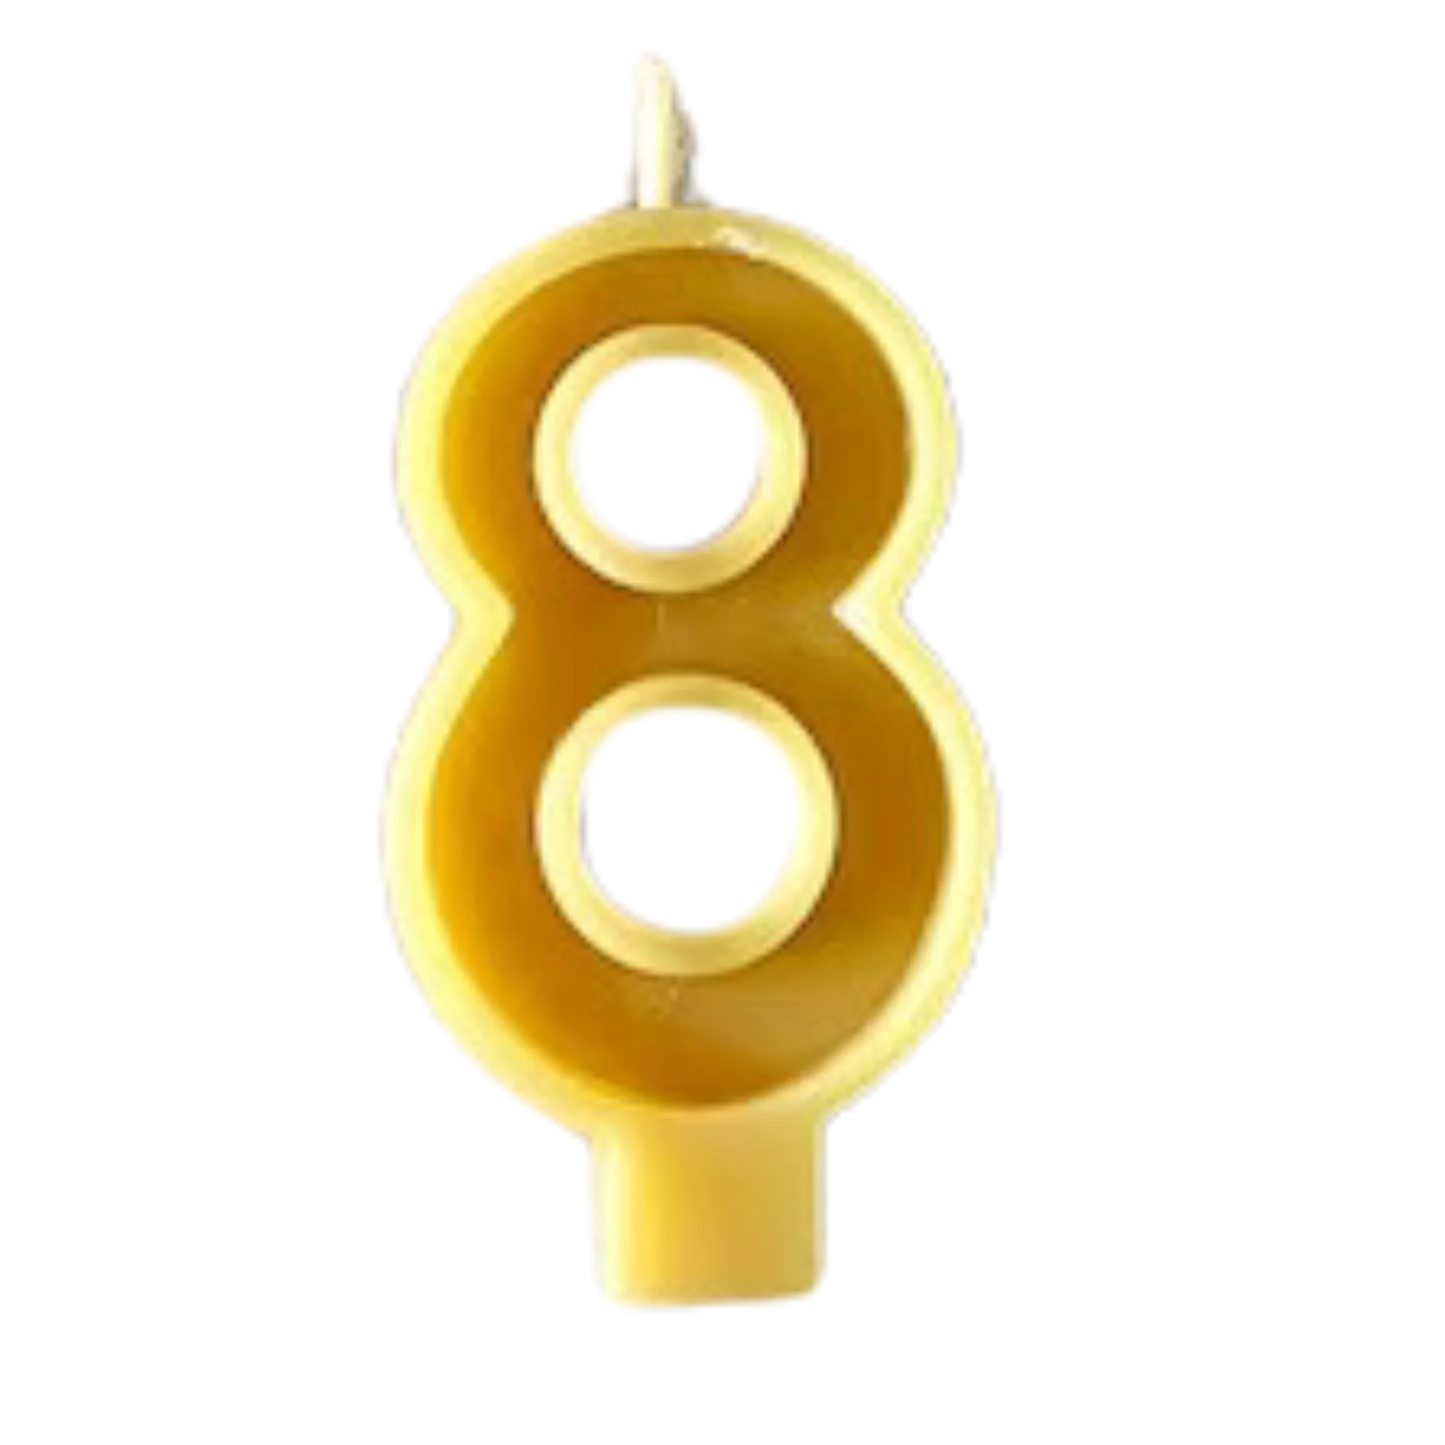 Zero Waste Celebrations with Beeswax Number Candles for All Ages